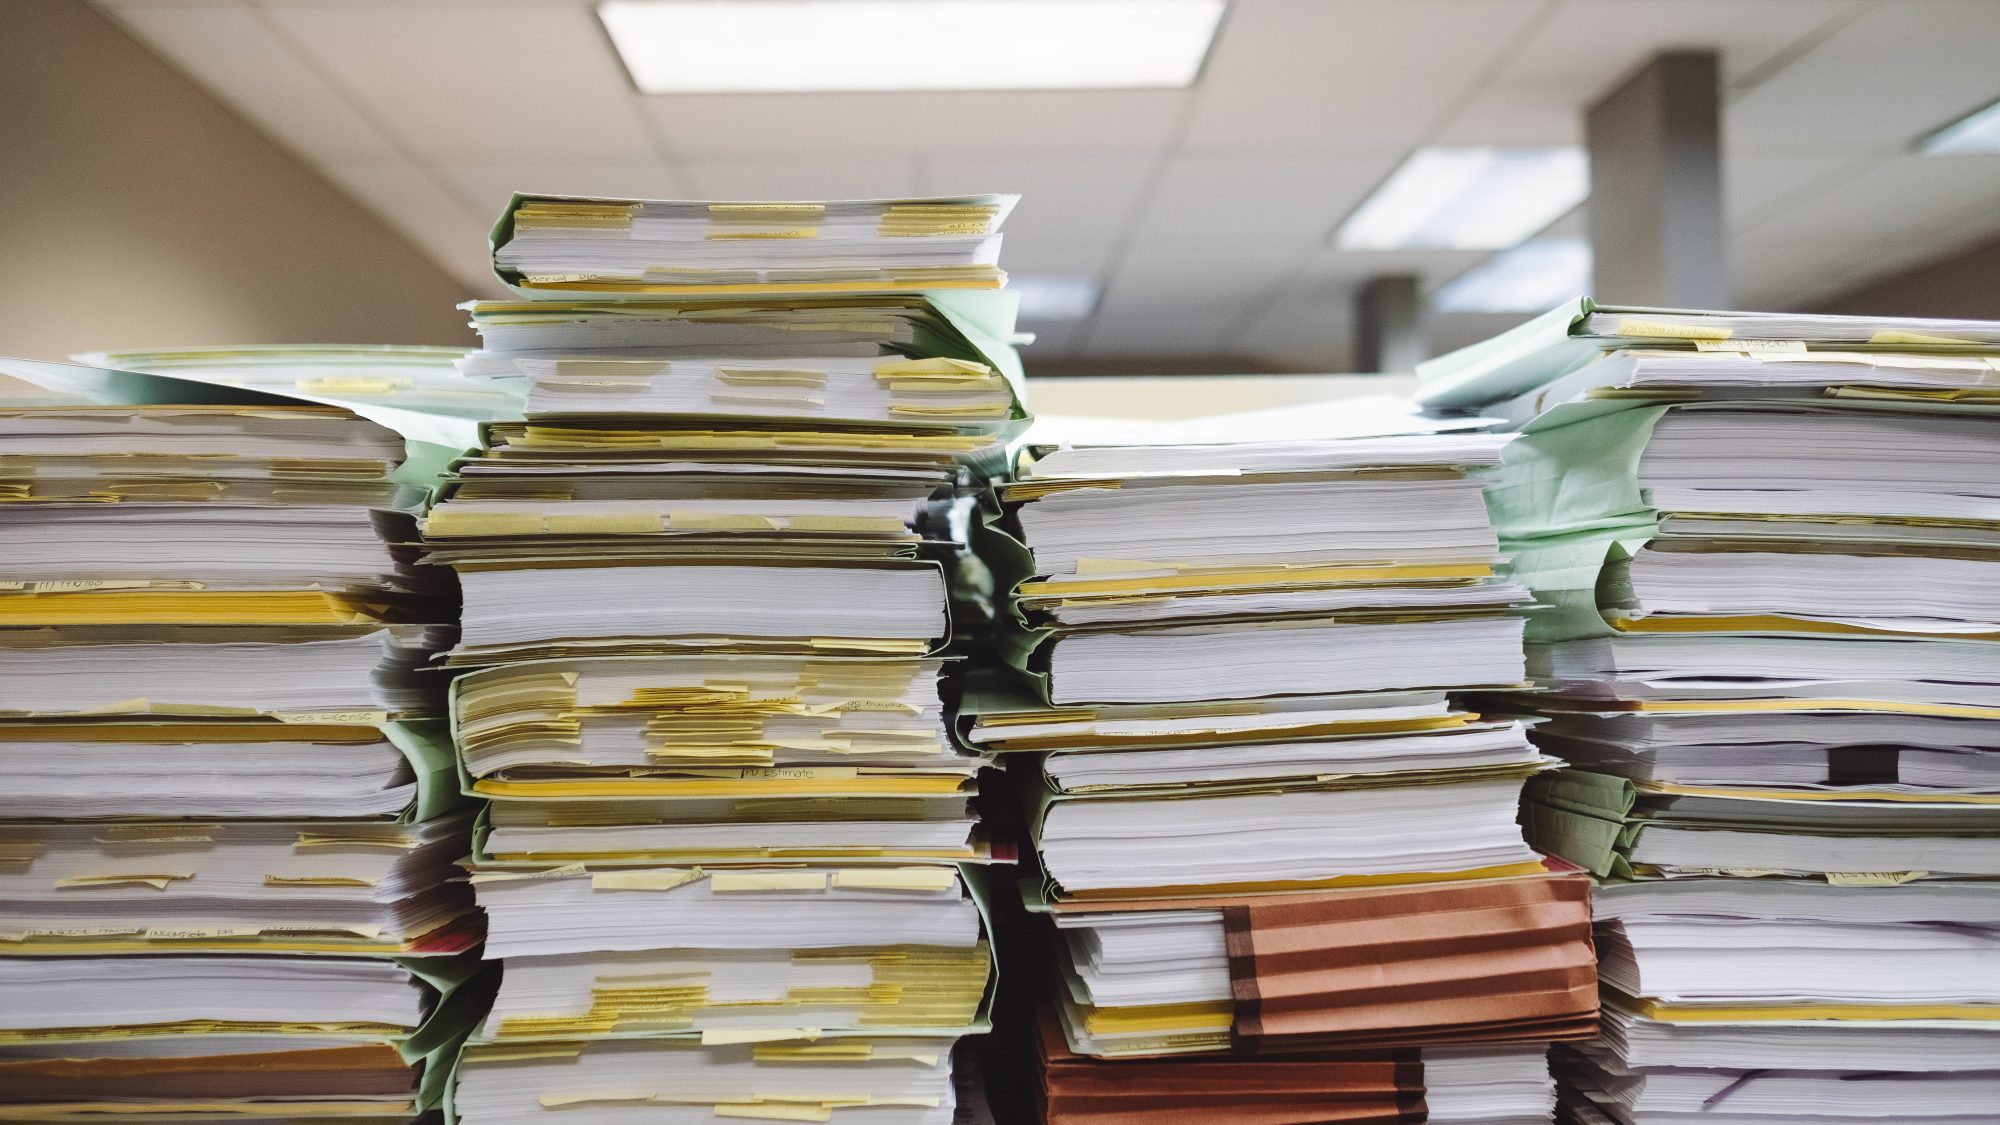 Four stacks of paper on a desk